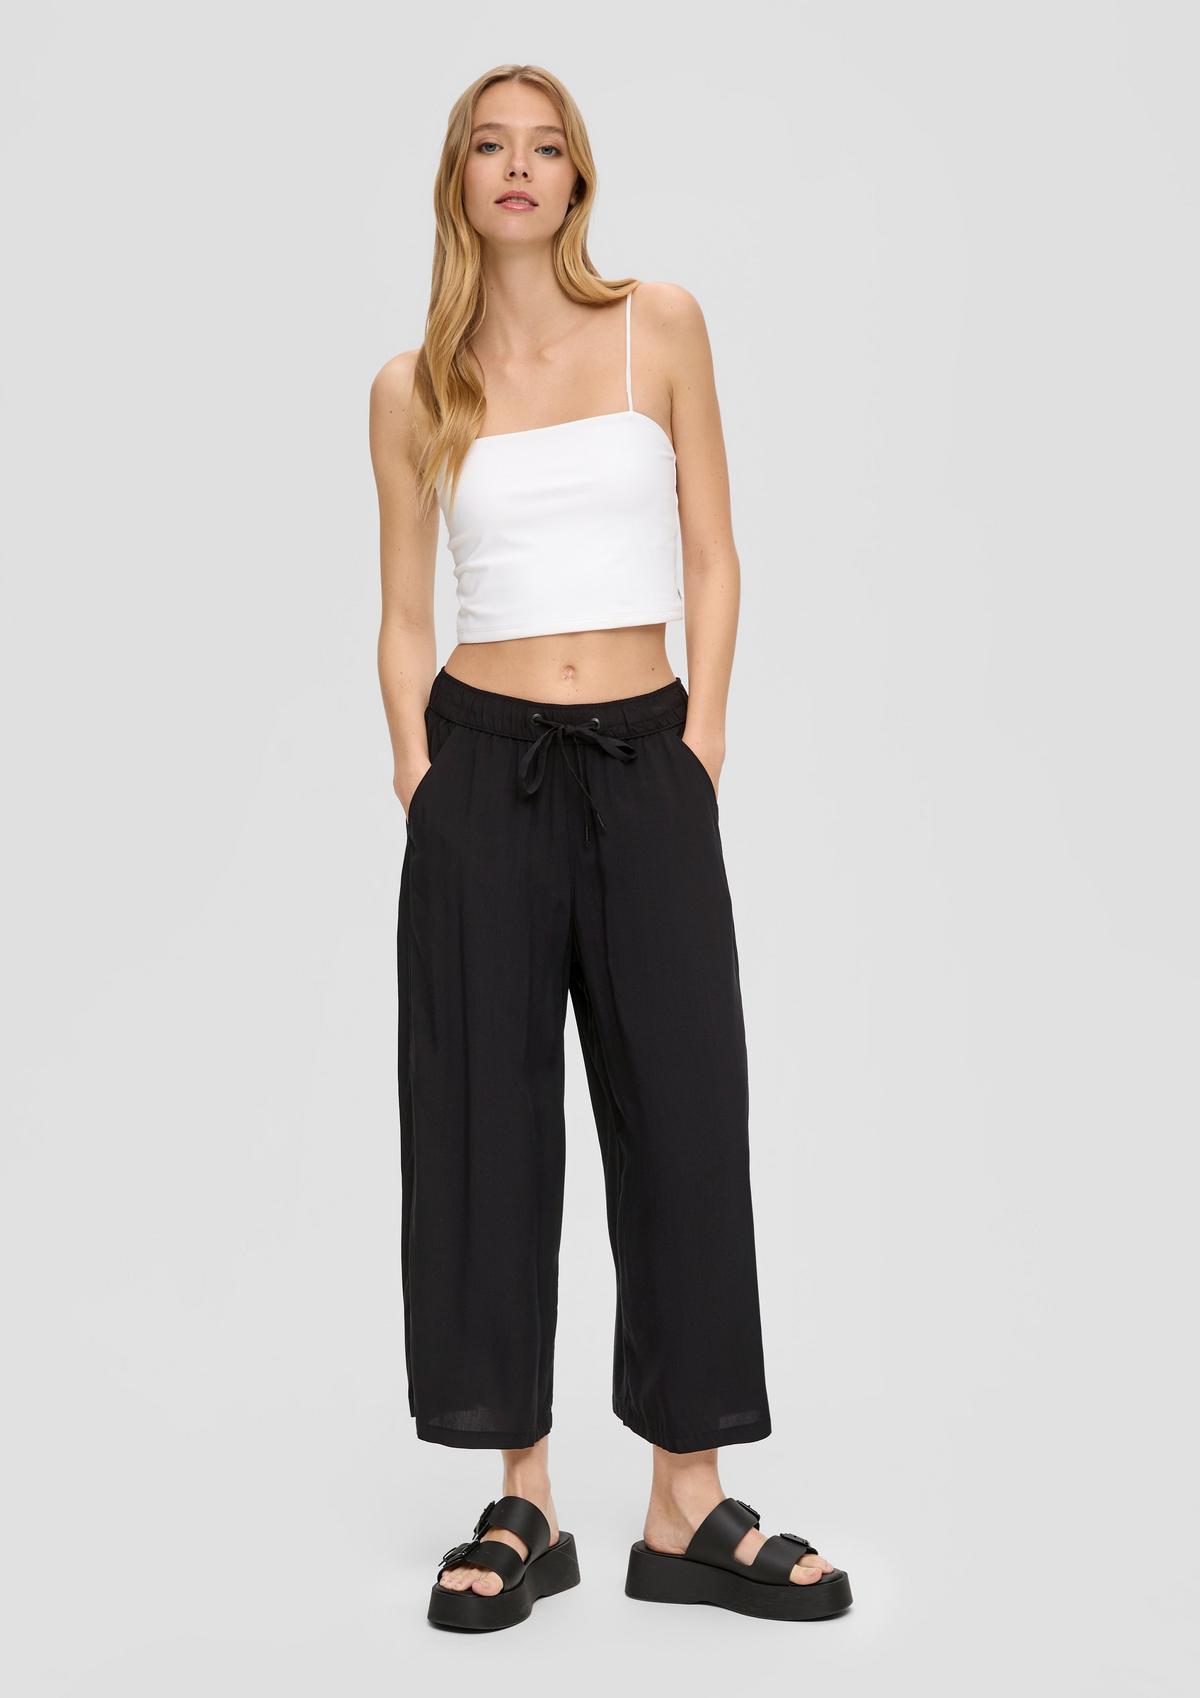 s.Oliver Culottes with an elasticated waistband